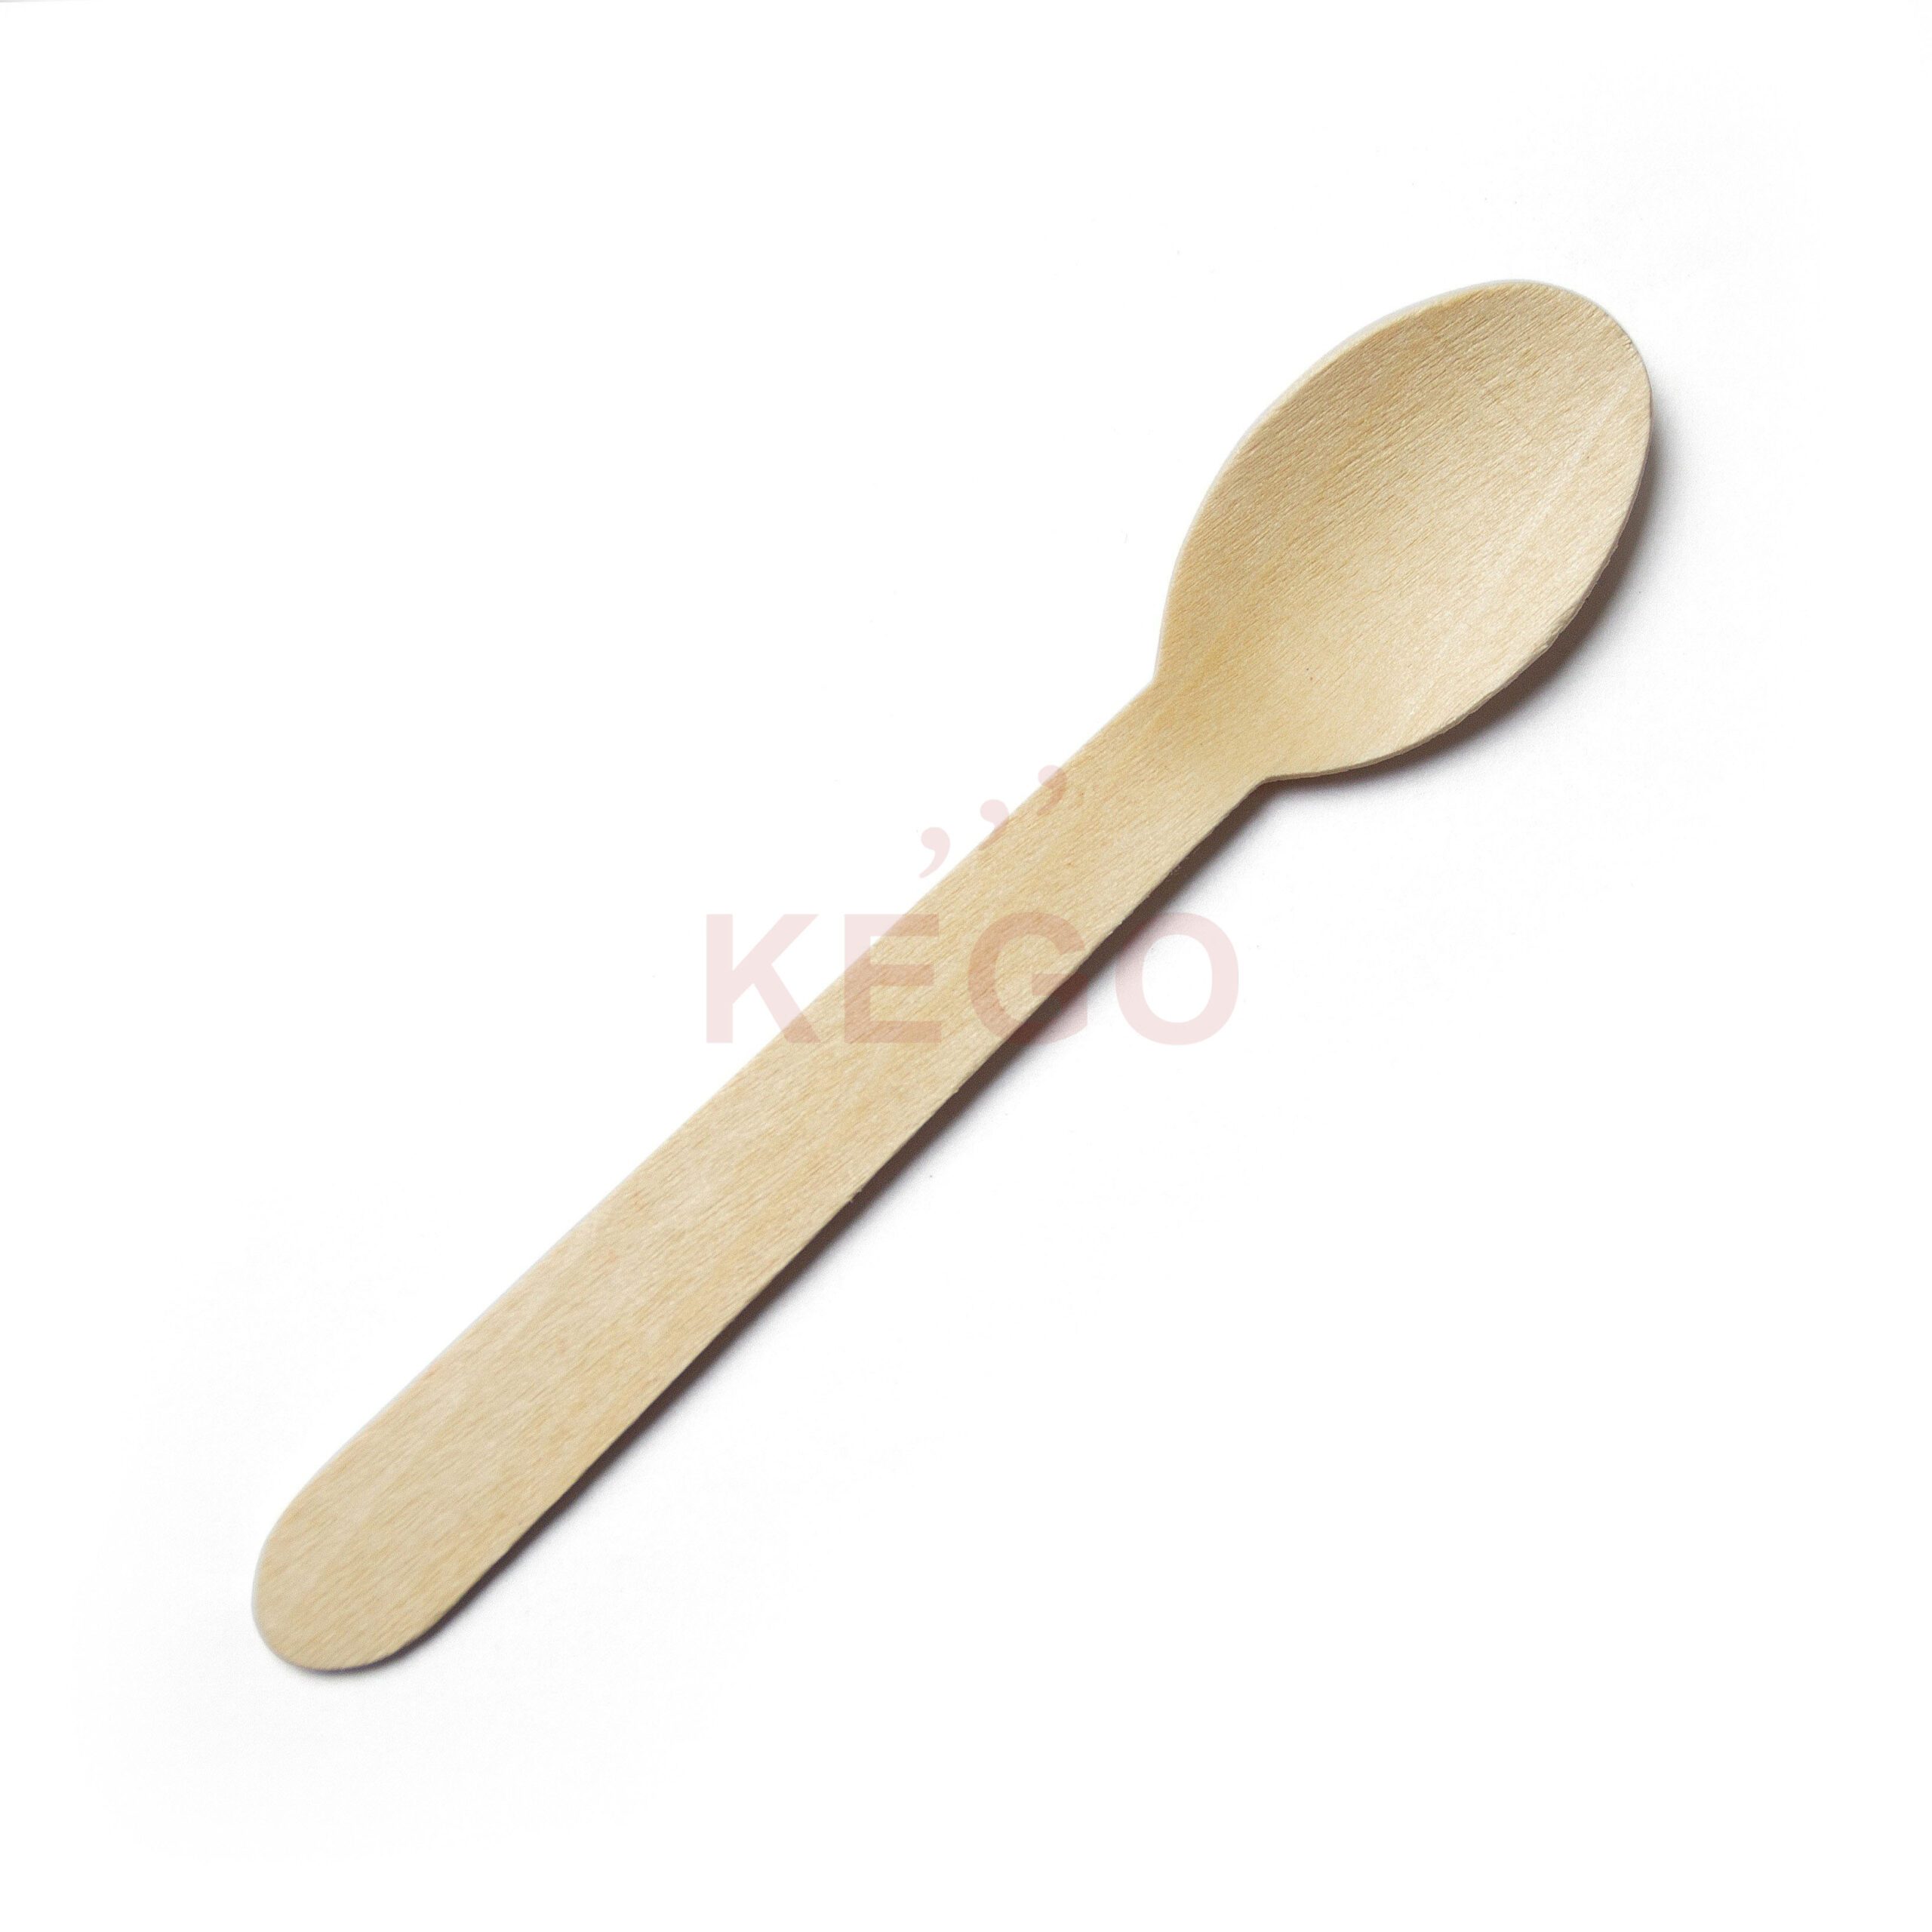 https://disposablewoodencutlery.com/wp-content/uploads/2015/09/Disposable-Wooden-Spoon-160-3-scaled.jpg